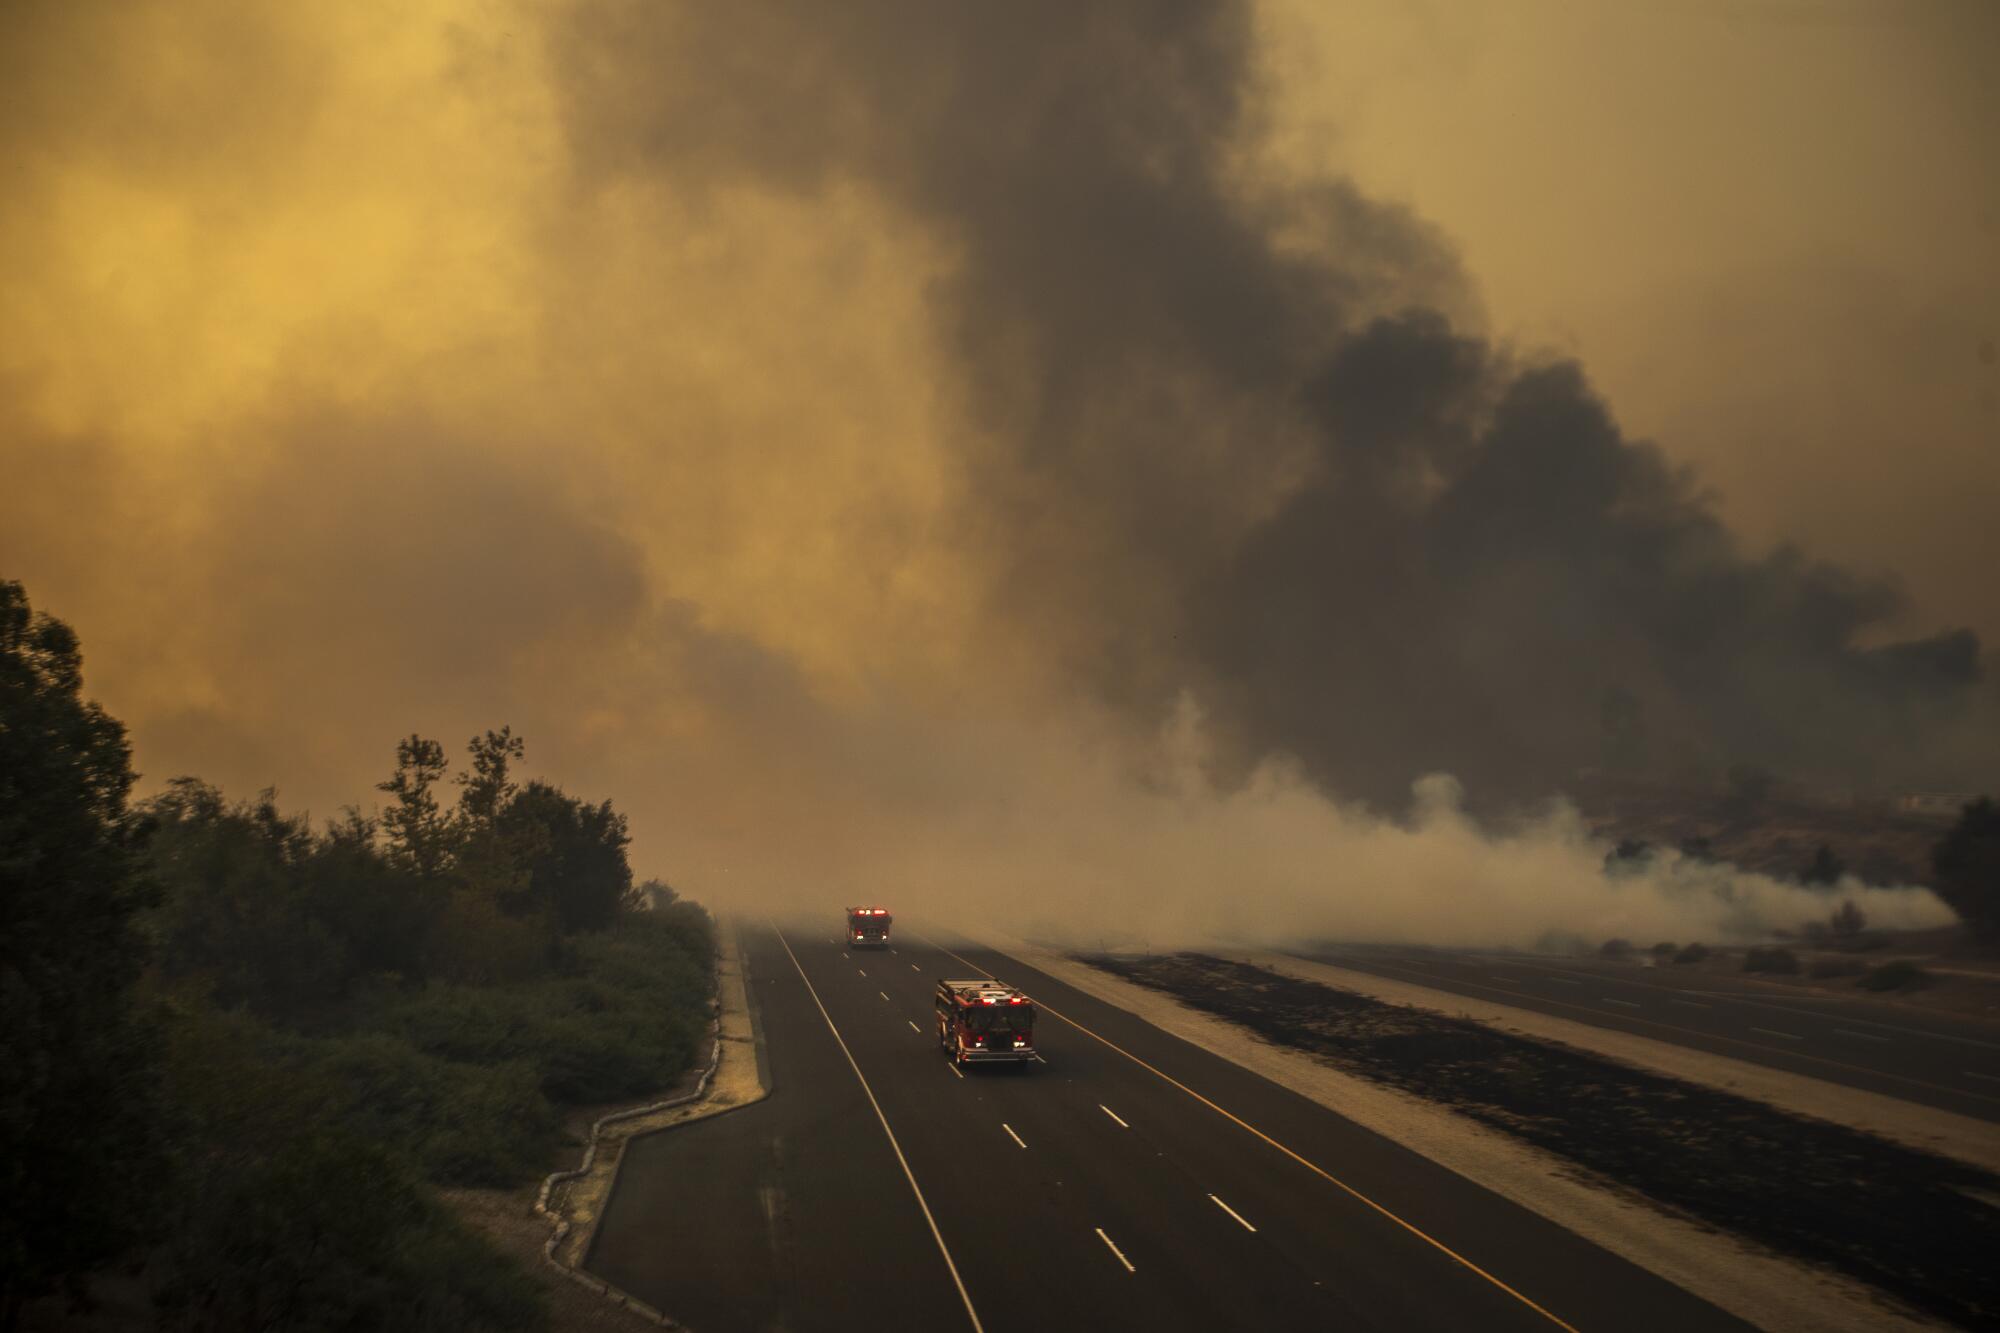 Firetrucks convoy through thick smoke on the 241 Freeway to battle the advancing Silverado fire fueled by Santa Ana winds.